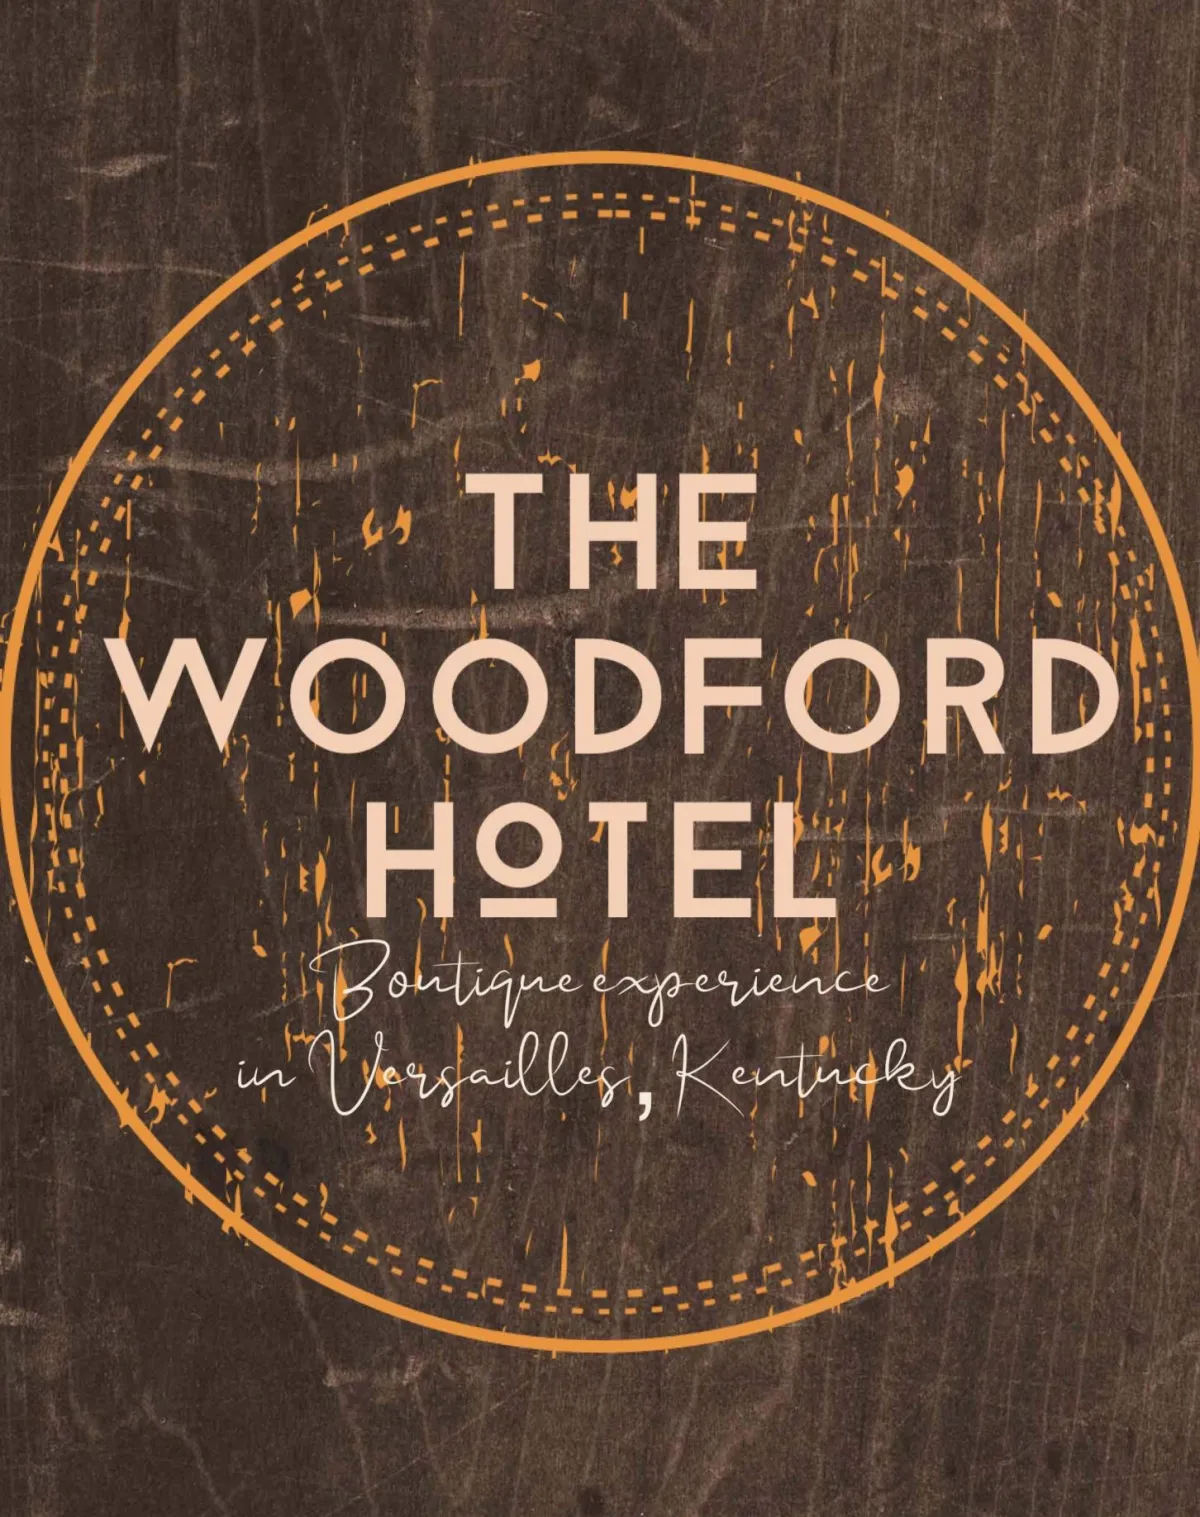 The Woodford Hotel